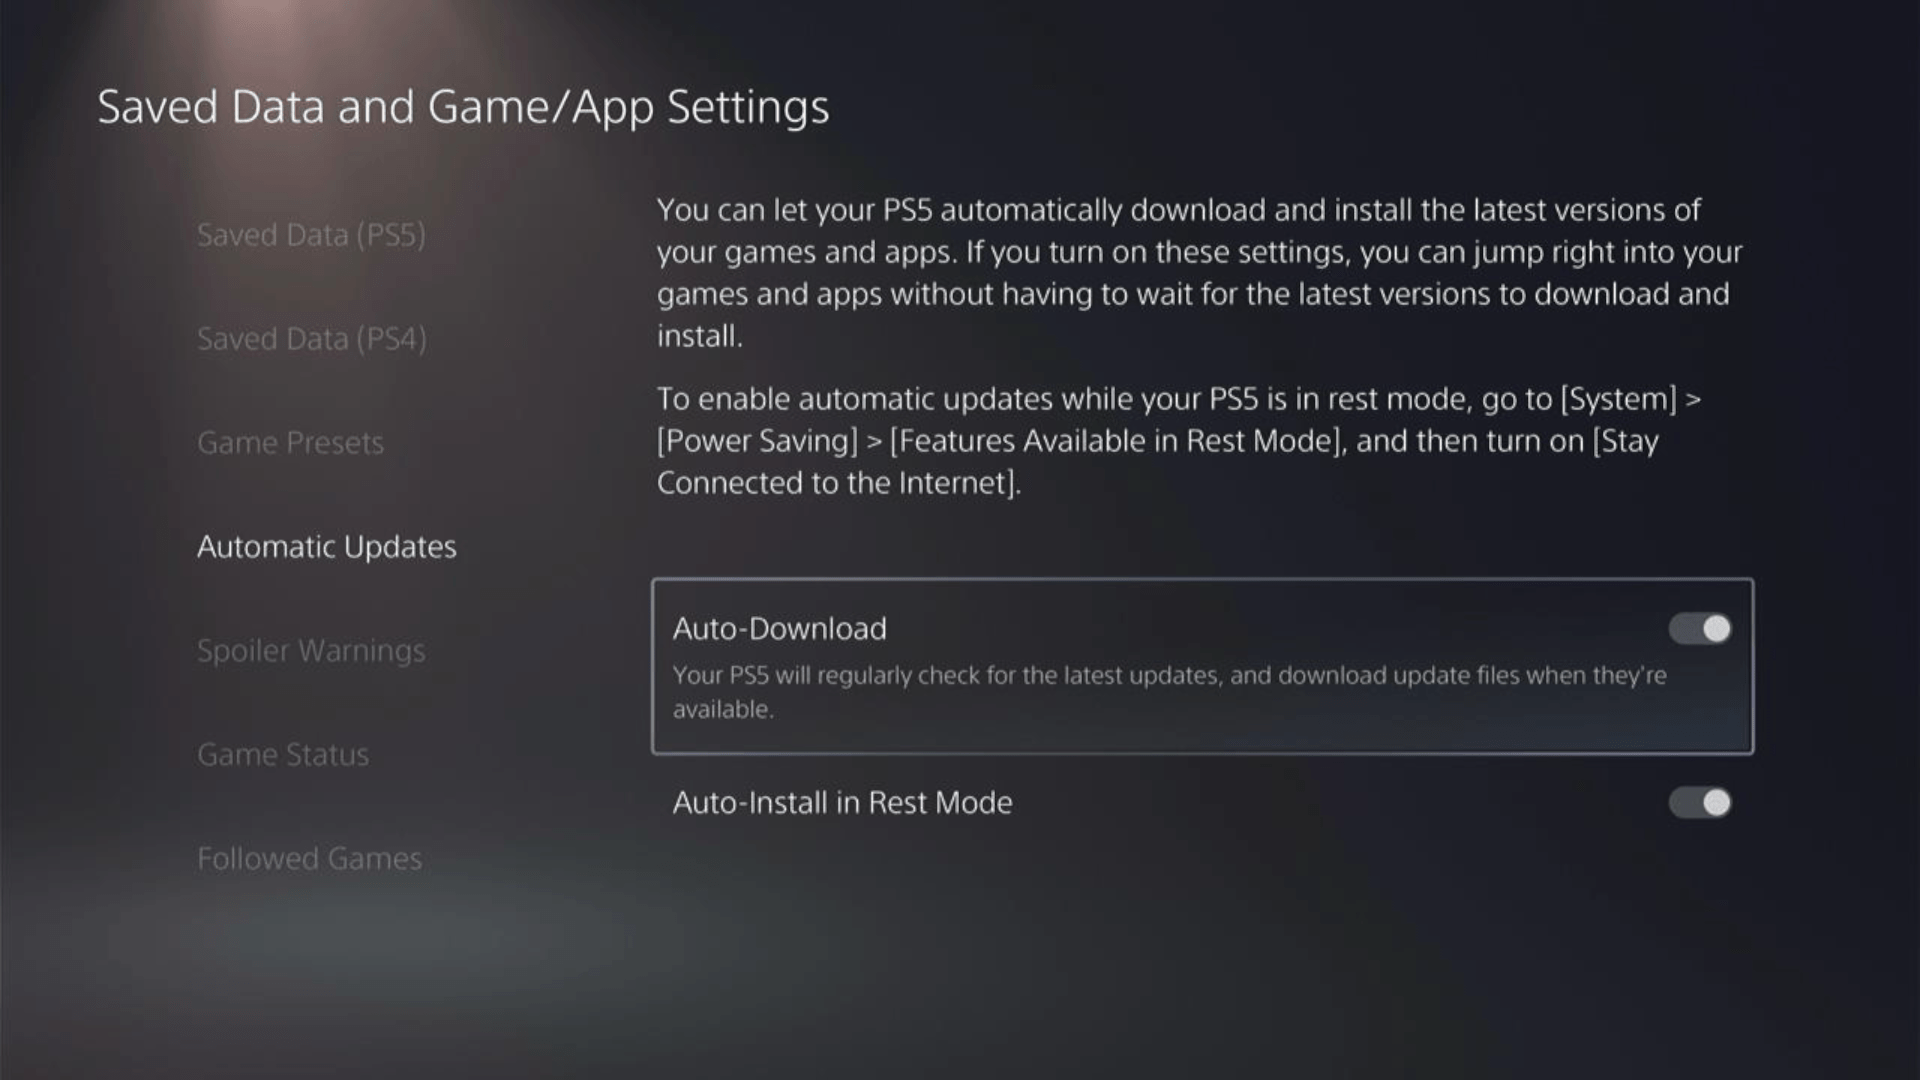 In the Saved Data and Game/App Settings window, select Automatic Updates from the left sidebar to enable automatic game updates to avoid crashing